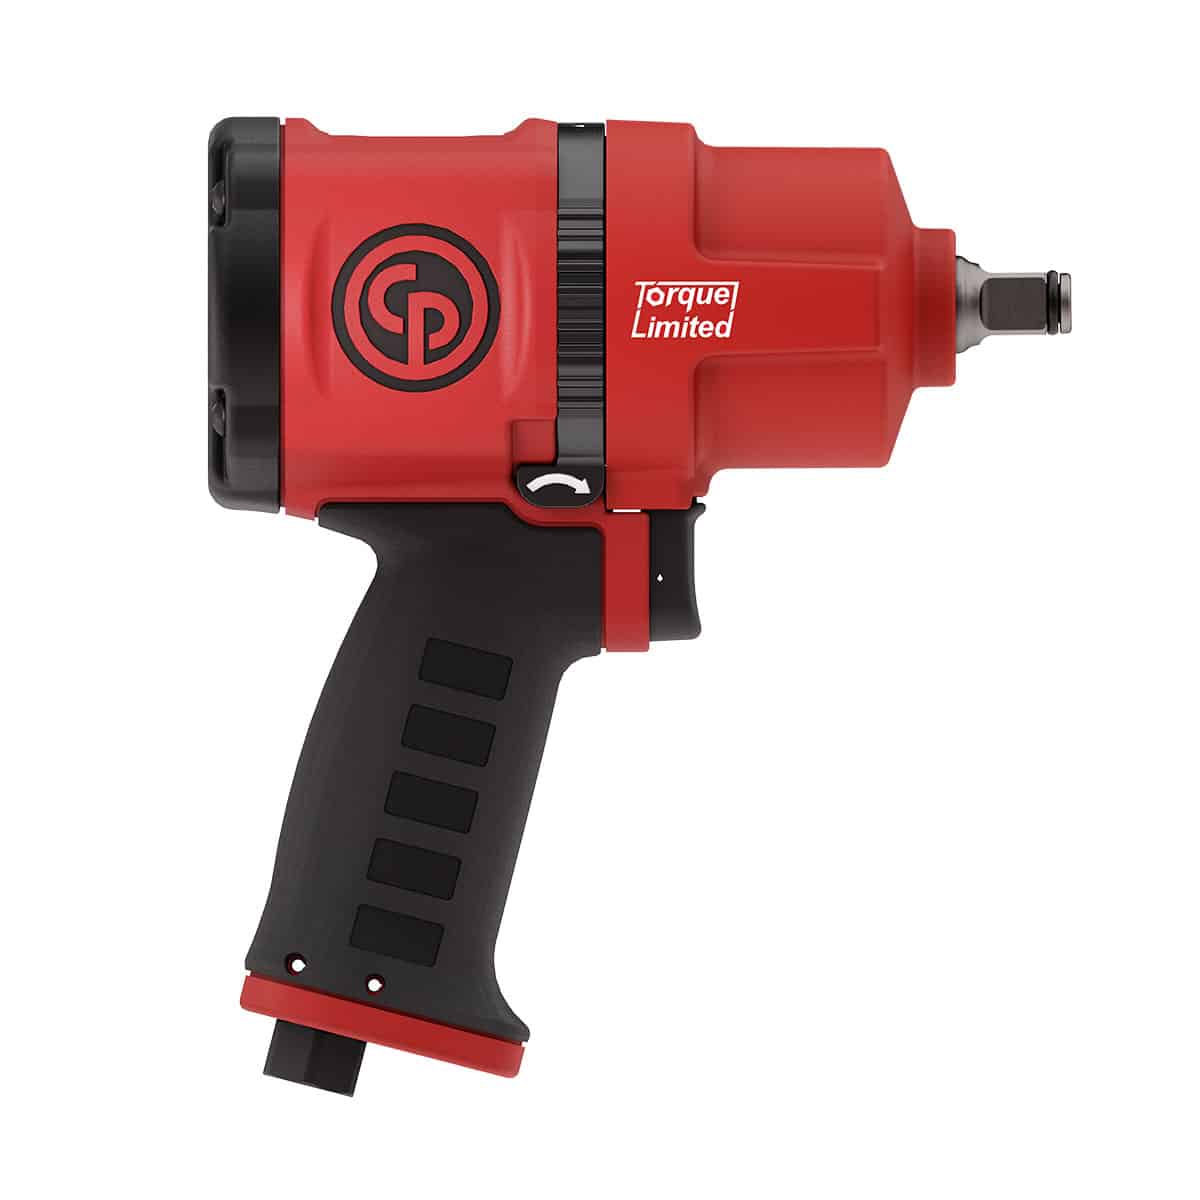 Chicago Pneumatic CP7748-TL 1/2" TORQUE LIMITED